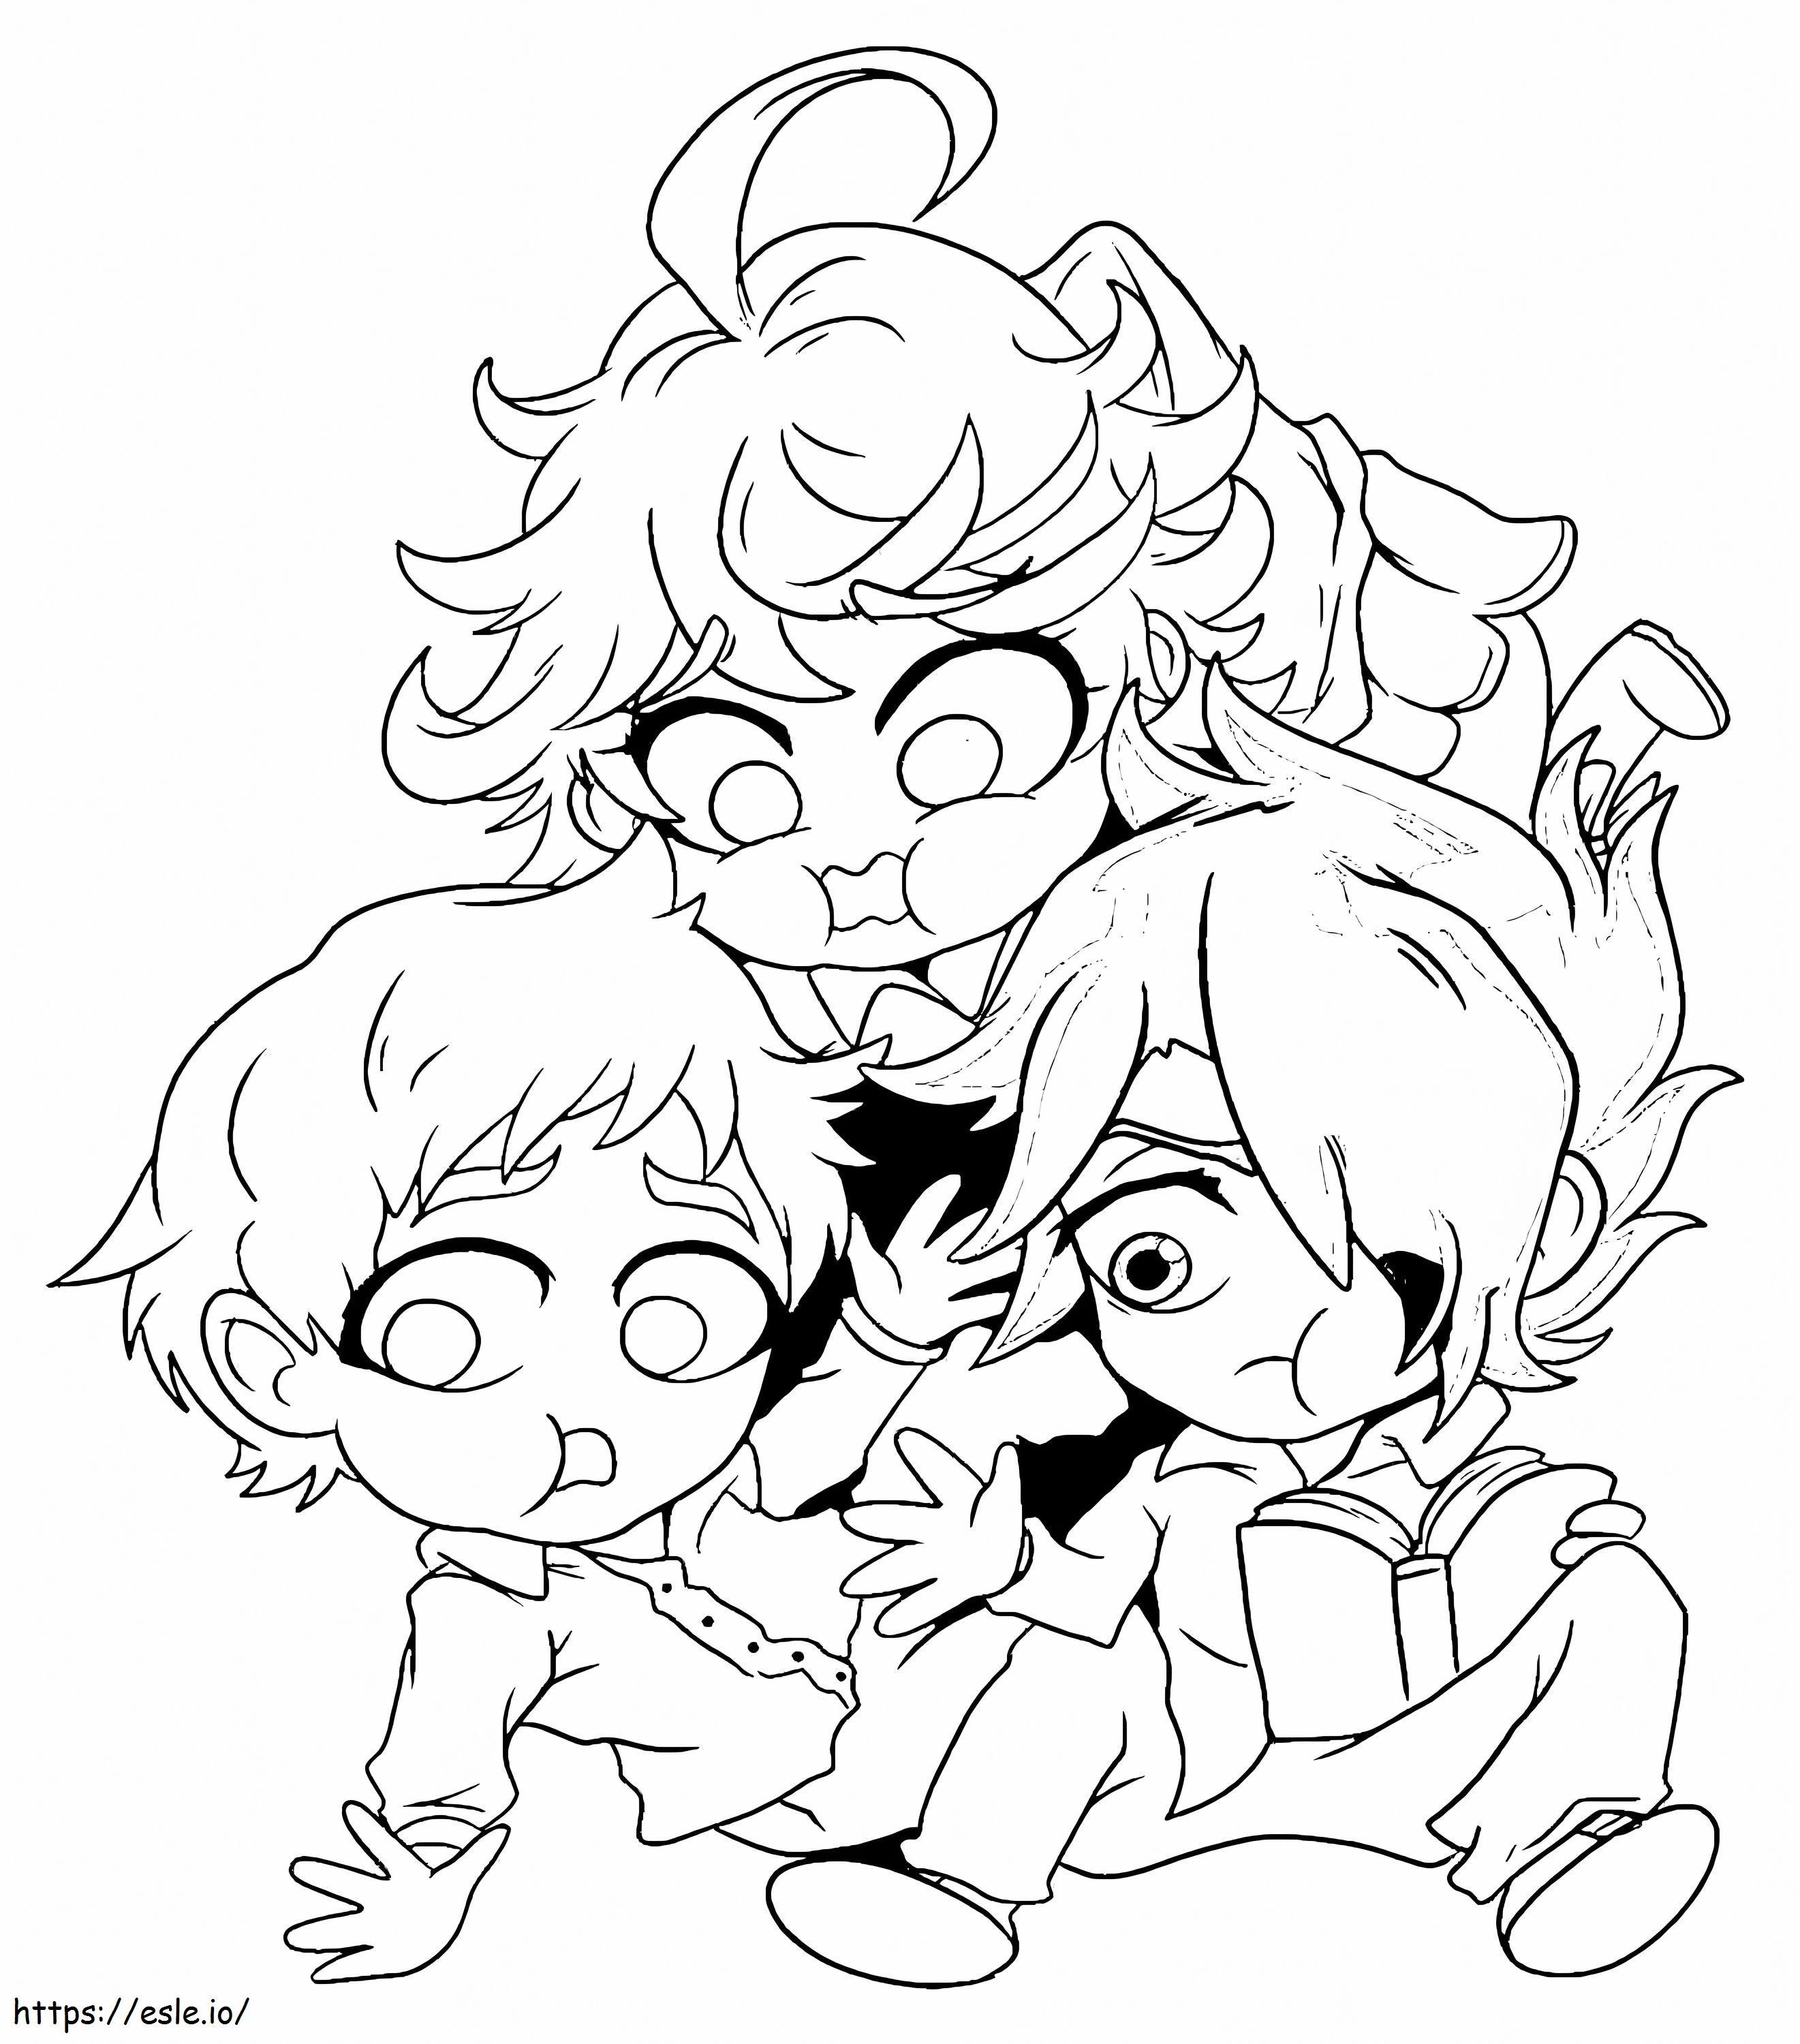 Adorable The Promised Neverland coloring page